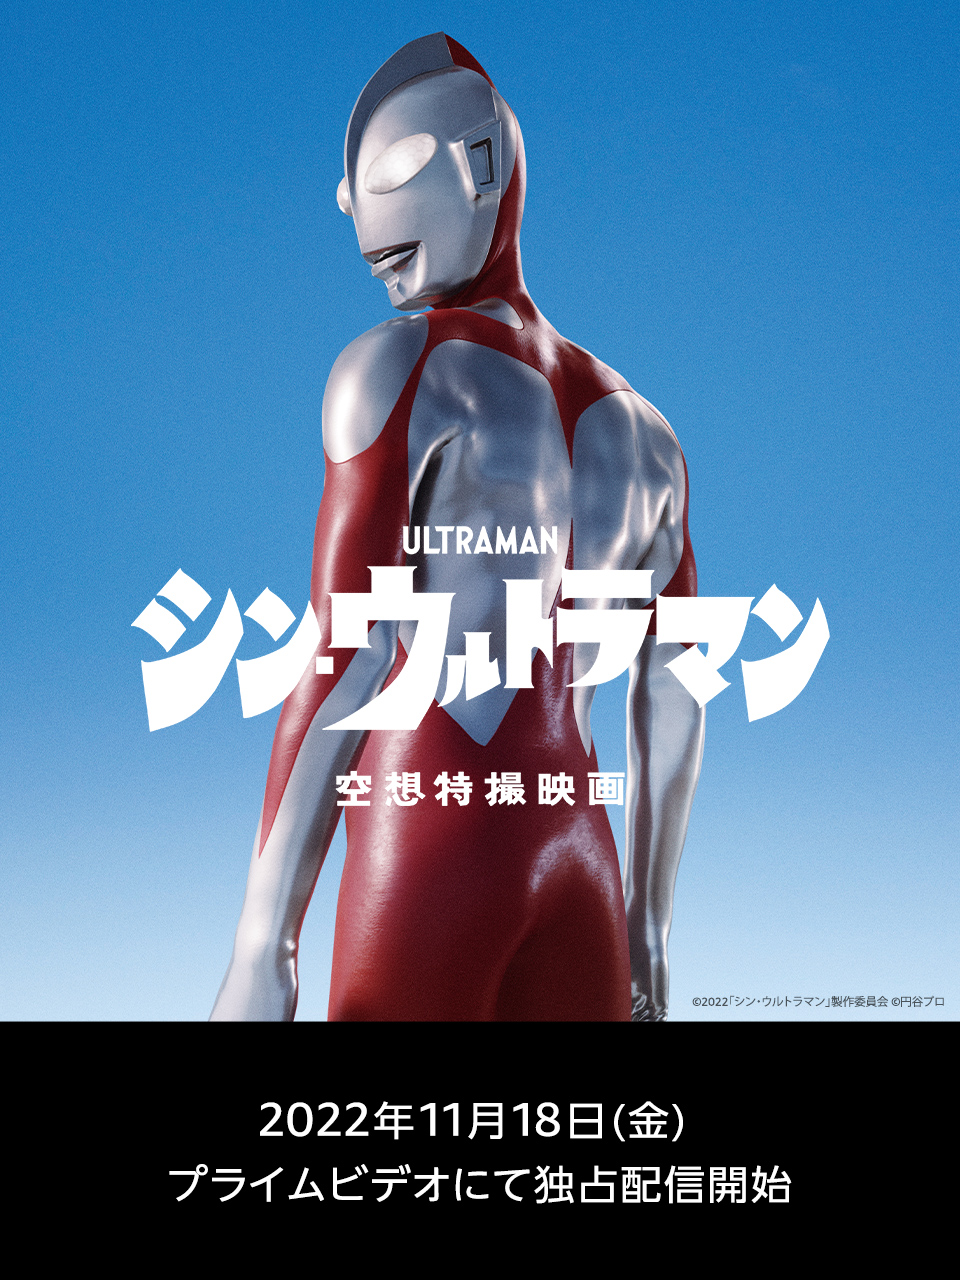 Prime Video 映画『シン・ウルトラマン』配信決定